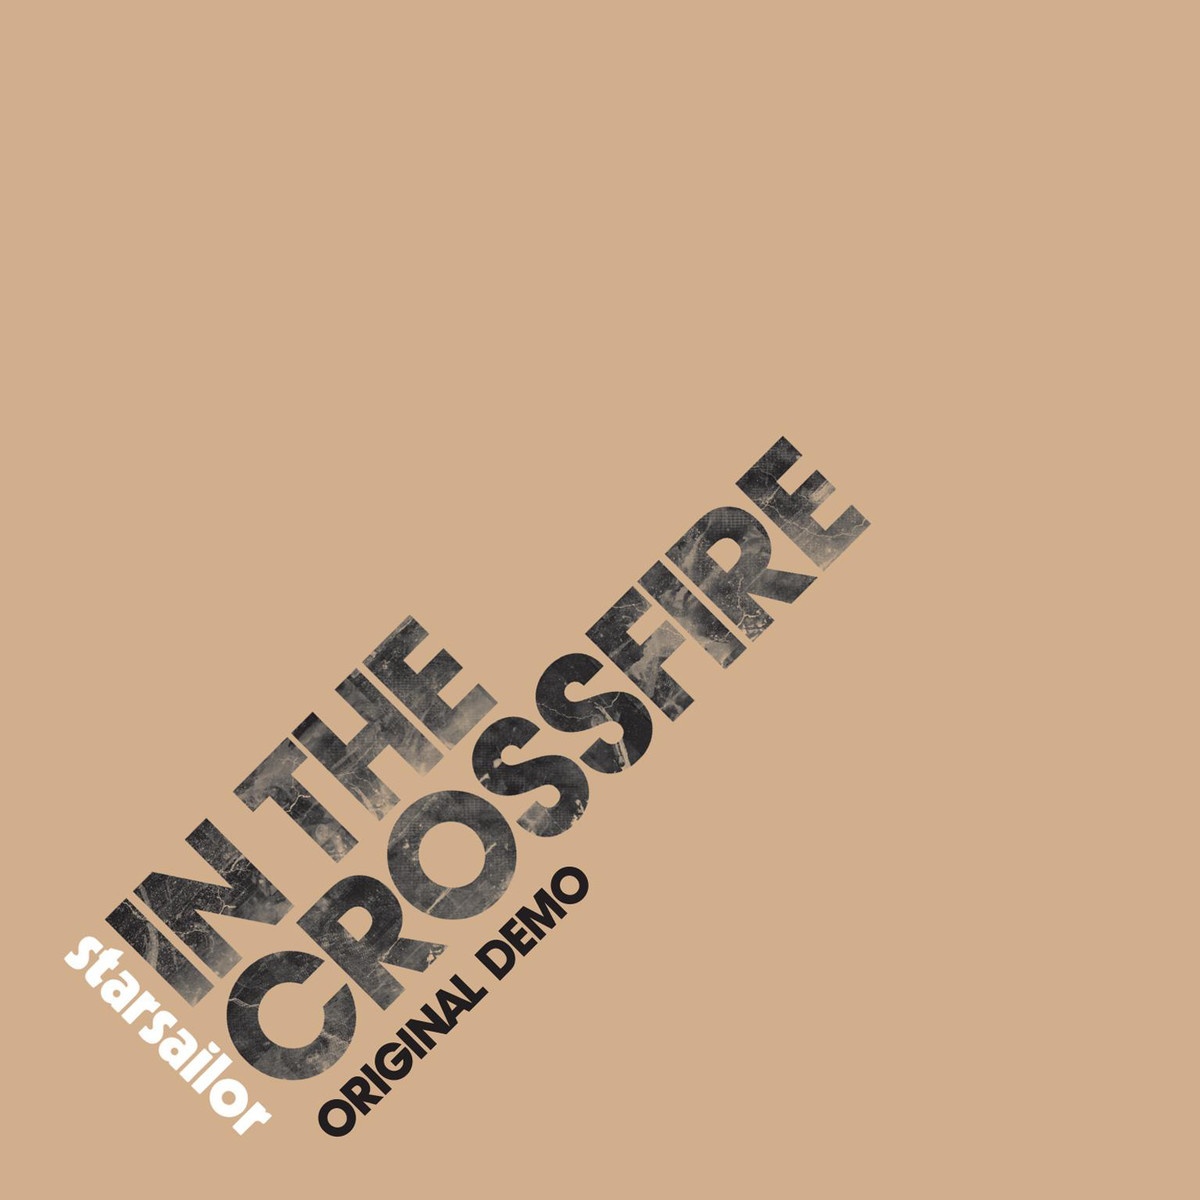 In The Crossfire